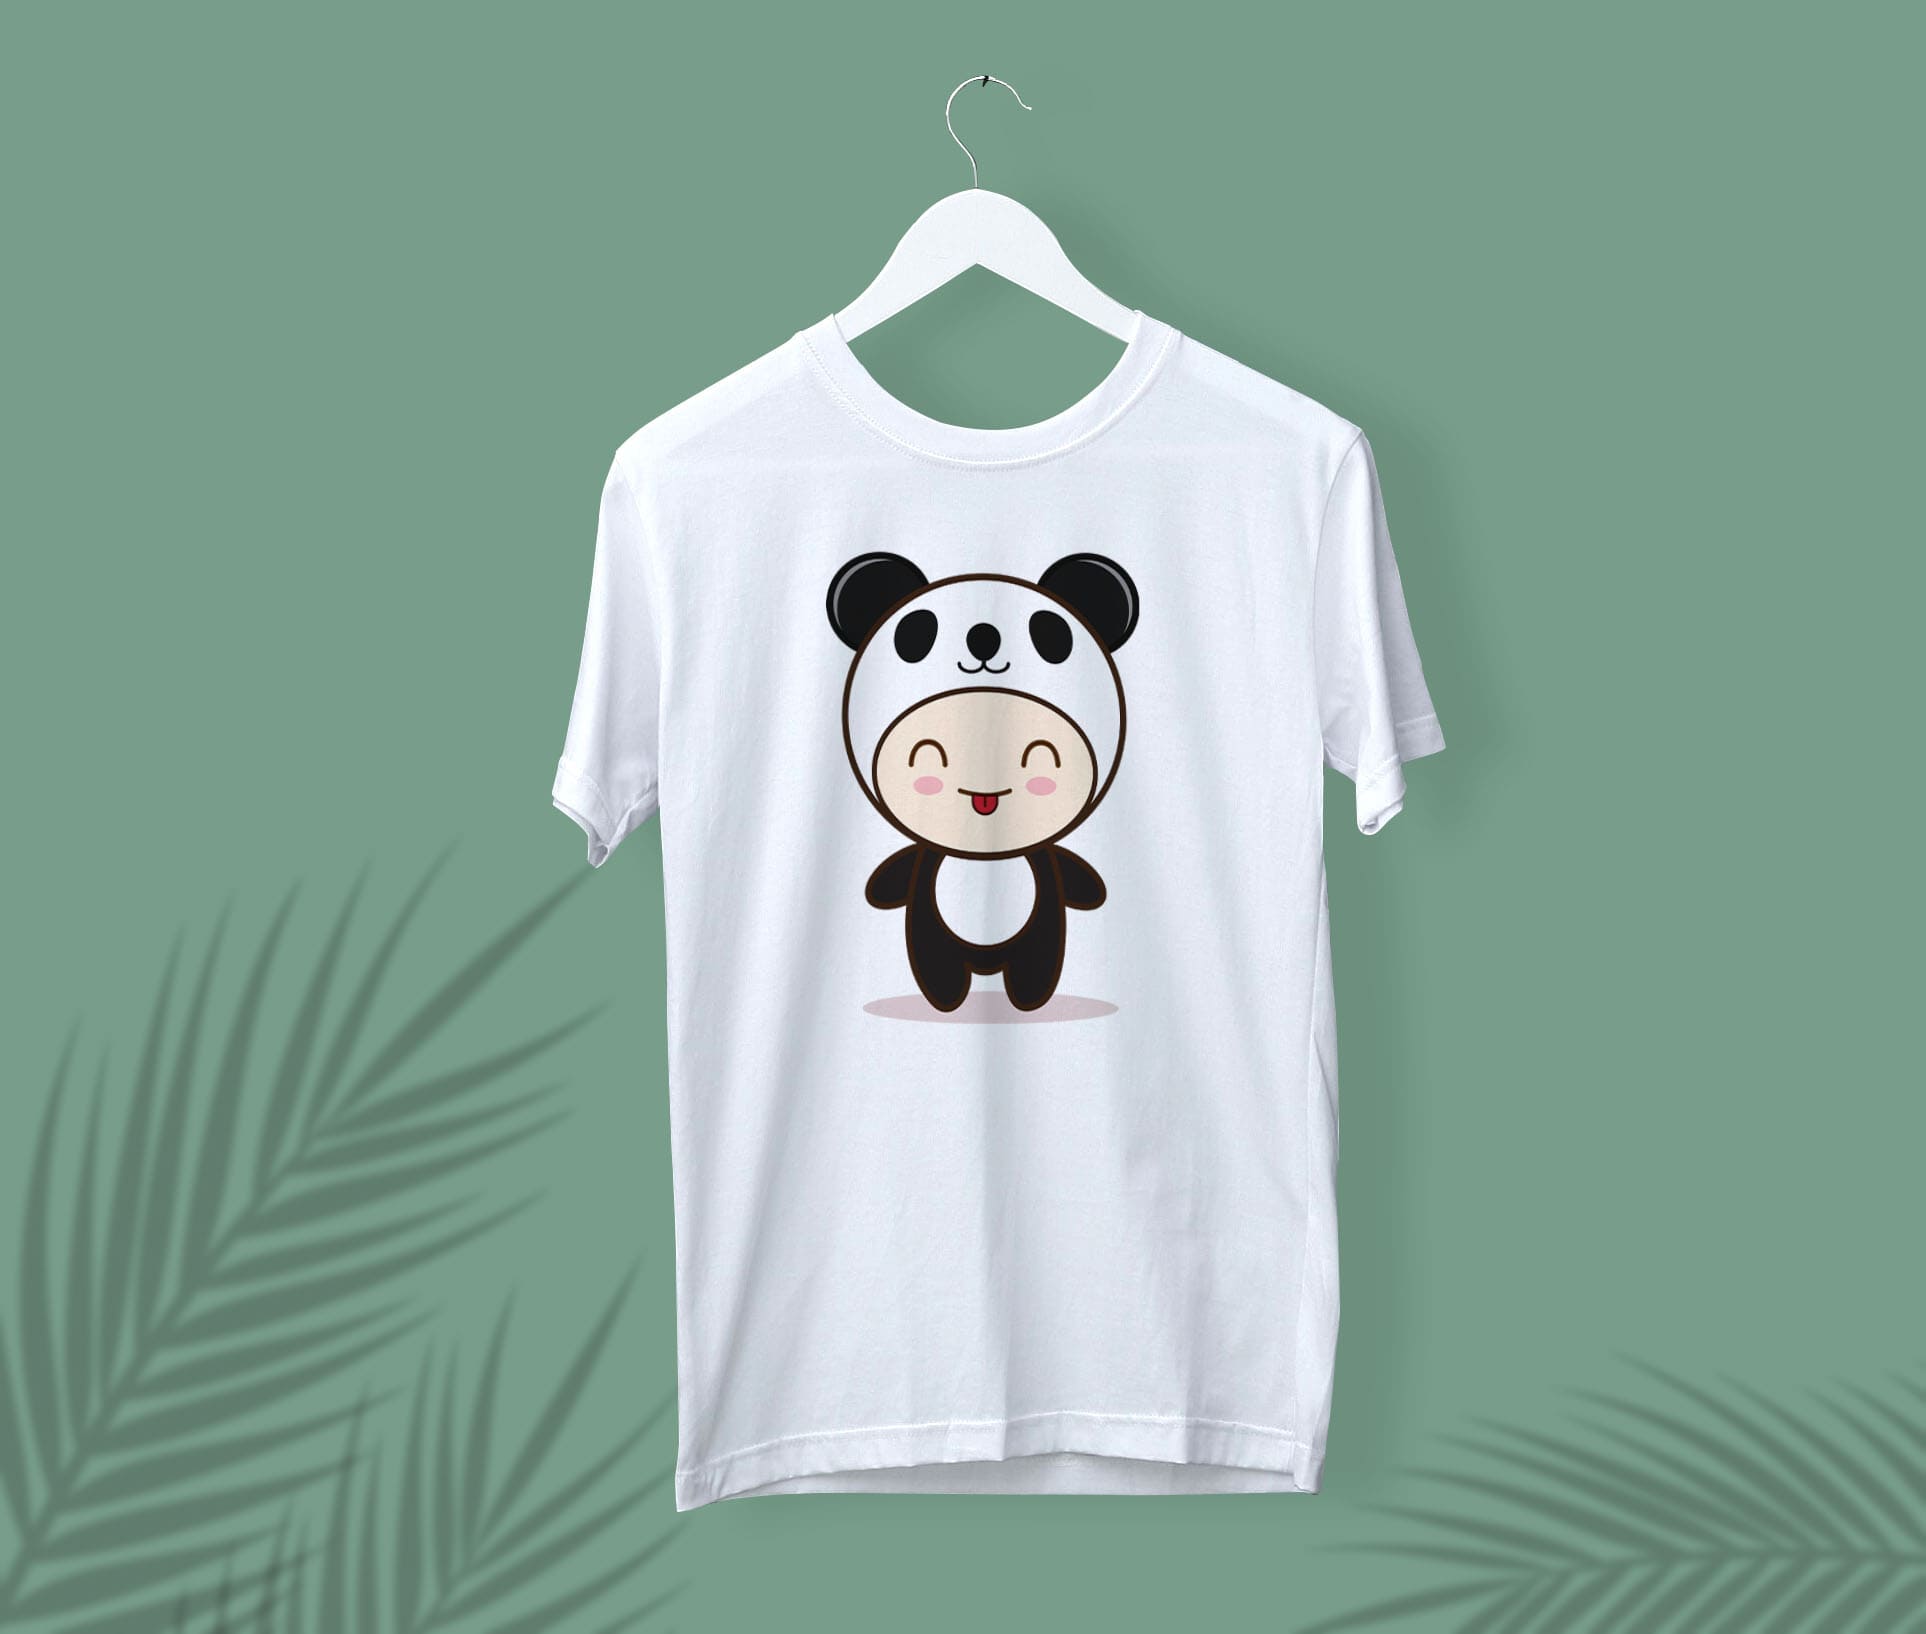 White t-shirt with a happy girl panda on a white hanger on a turquoise background.